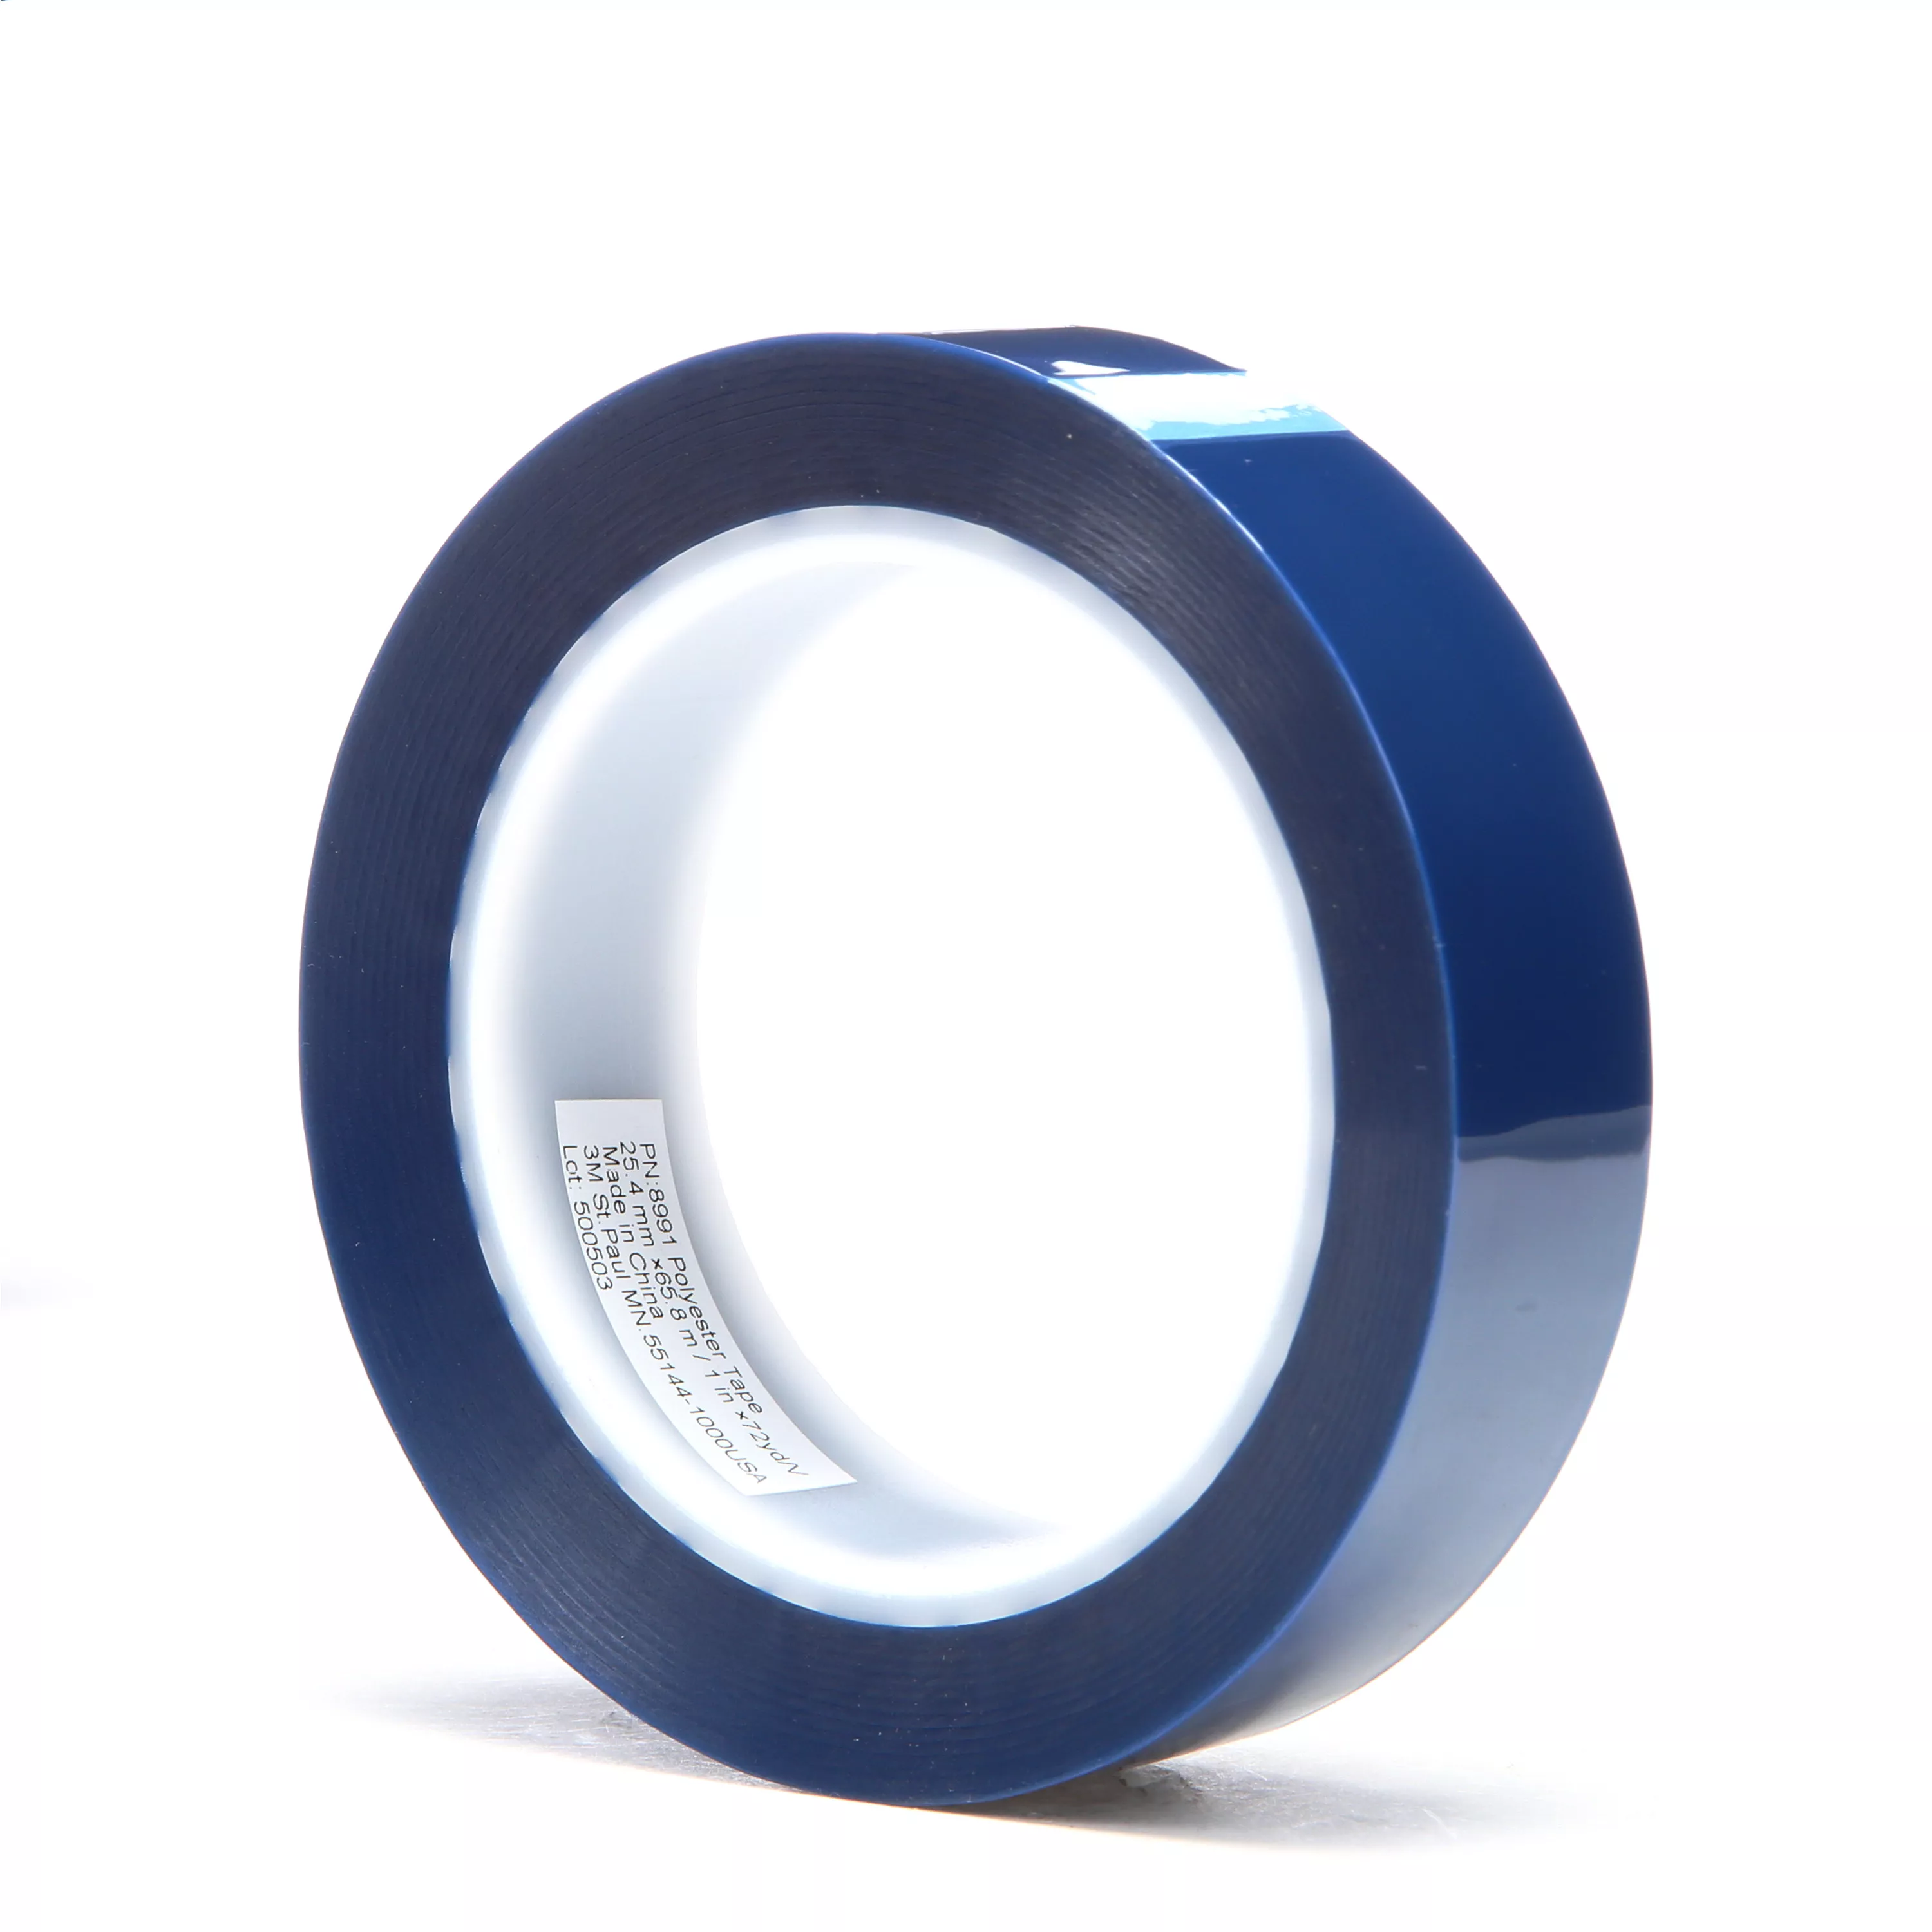 3M™ Polyester Tape 8991, Blue, 1 in x 72 yd, 2.4 mil, 36 Roll/Case